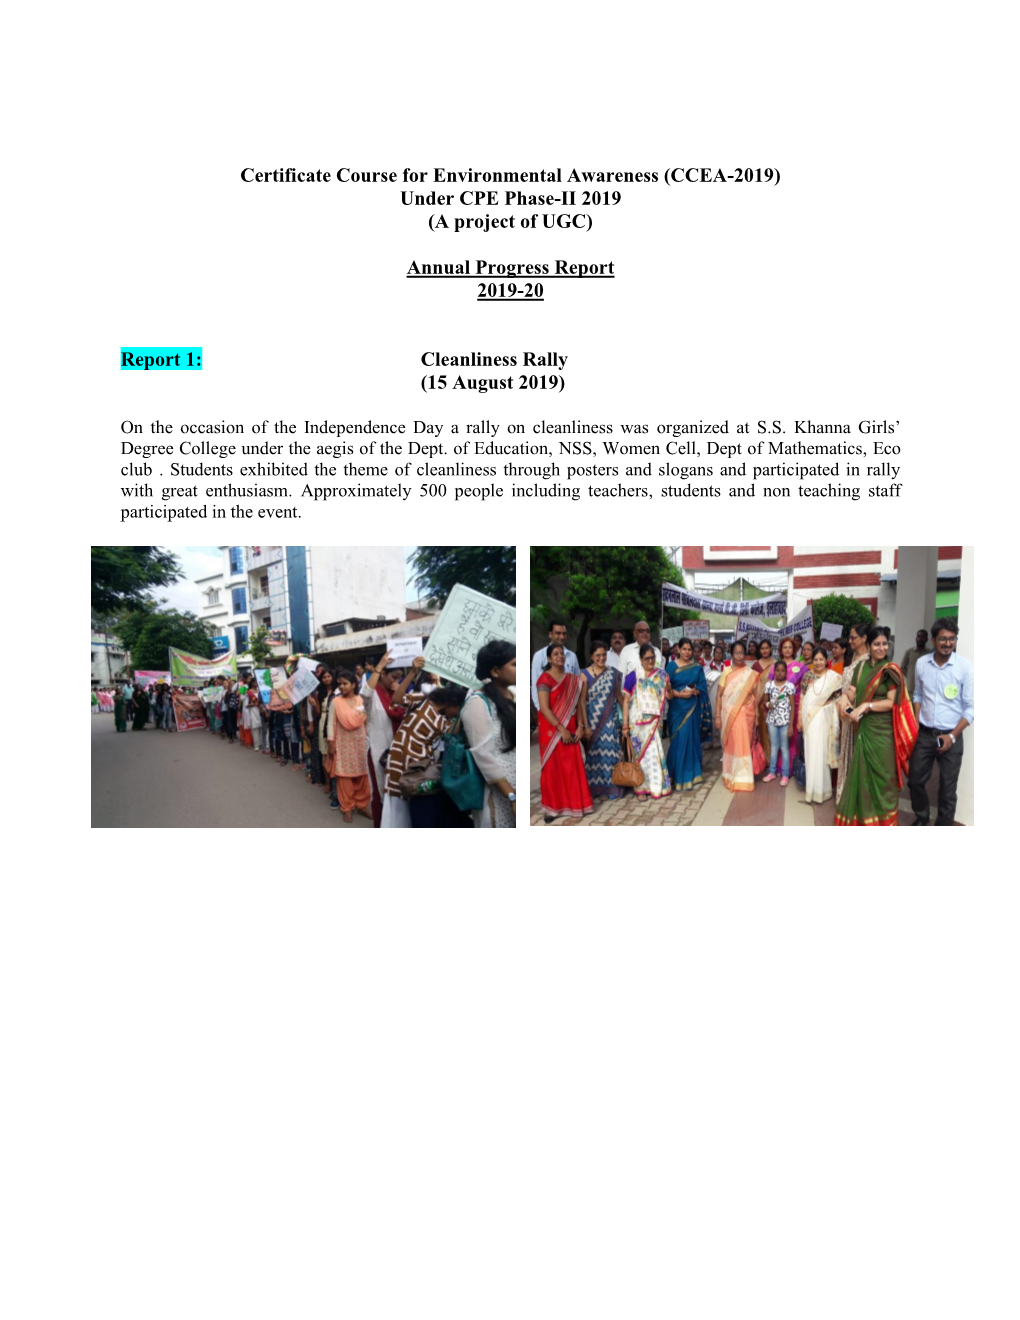 Certificate Course for Environmental Awareness (CCEA-2019) Under CPE Phase-II 2019 (A Project of UGC) Annual Progress Report